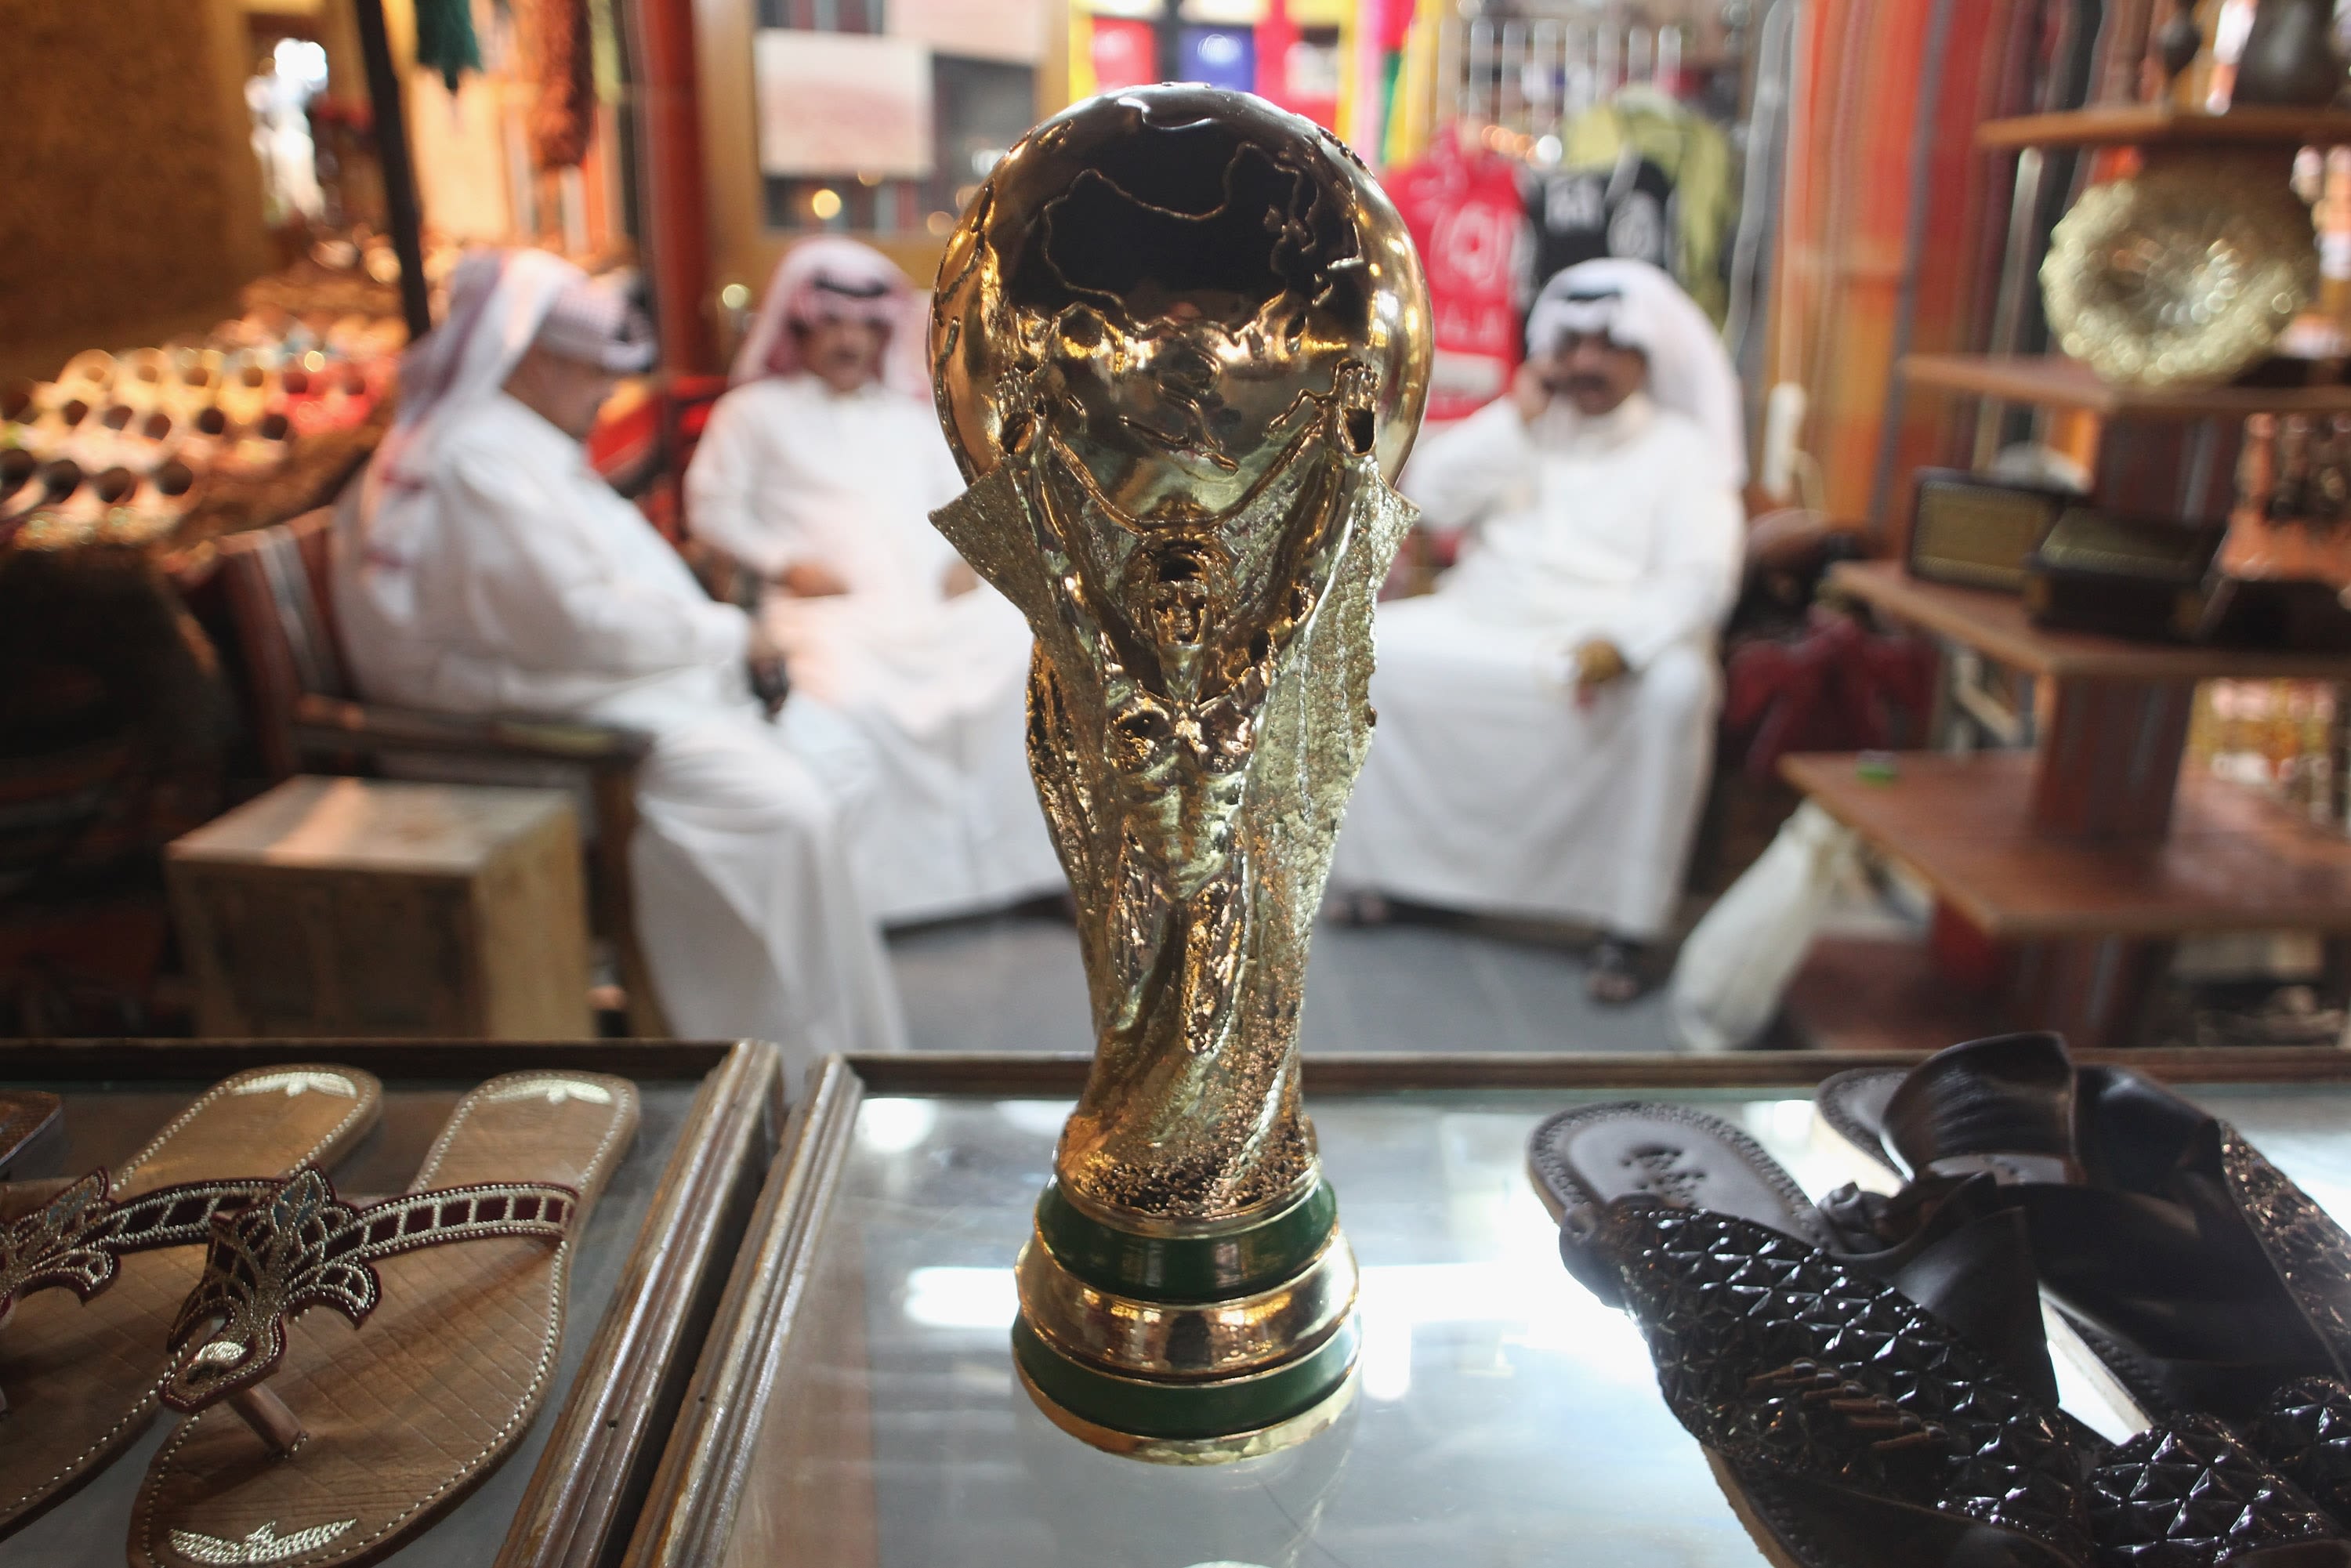 Why World Cup may a win for Qatar despite human rights criticism